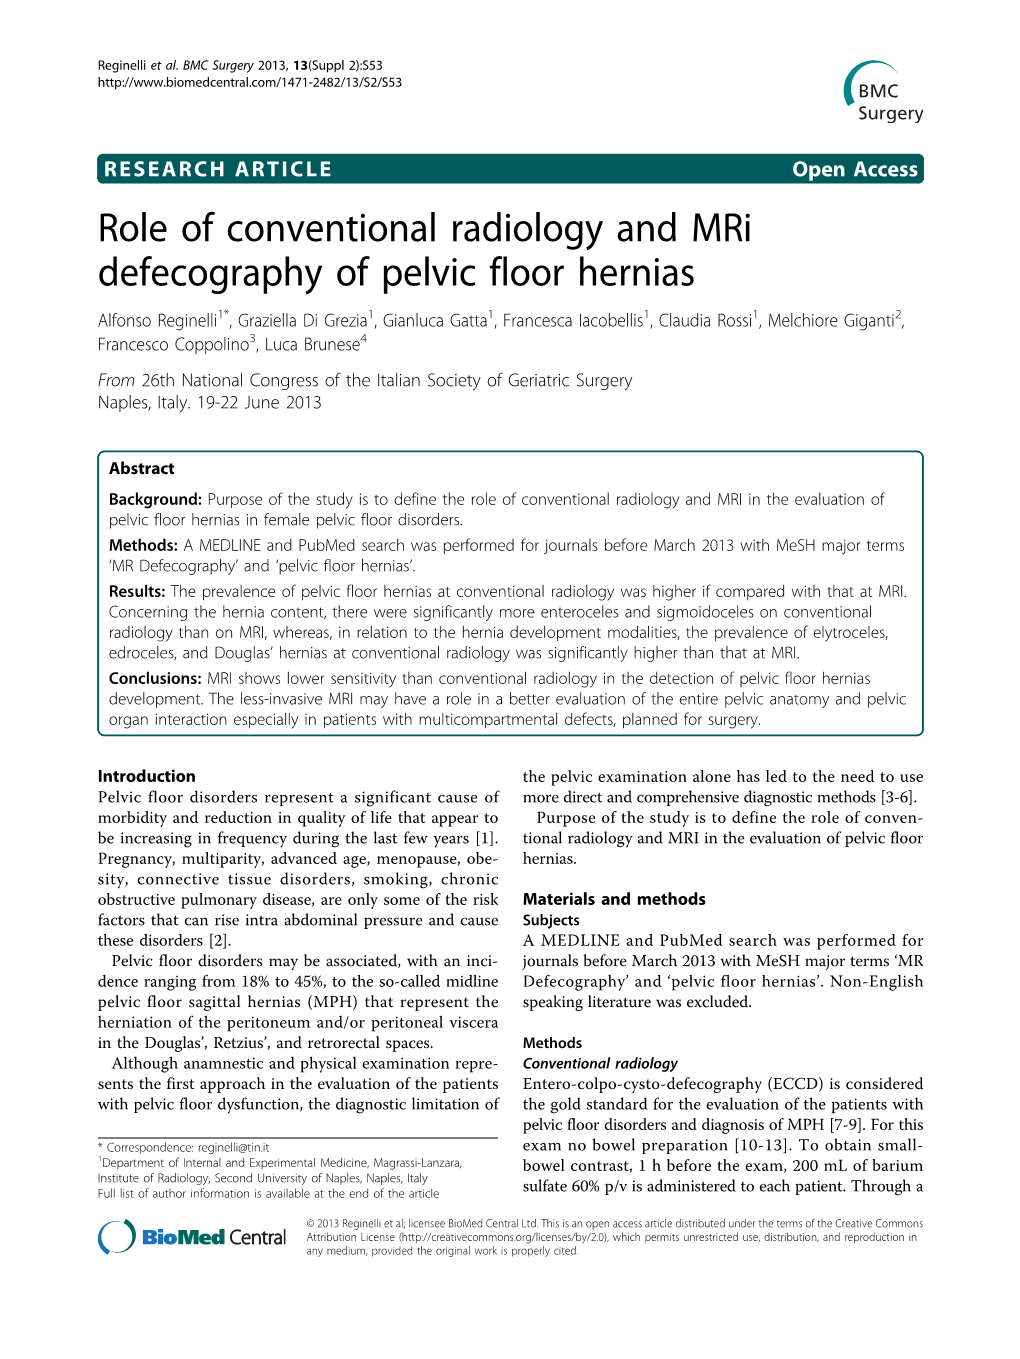 Role of Conventional Radiology and Mri Defecography of Pelvic Floor